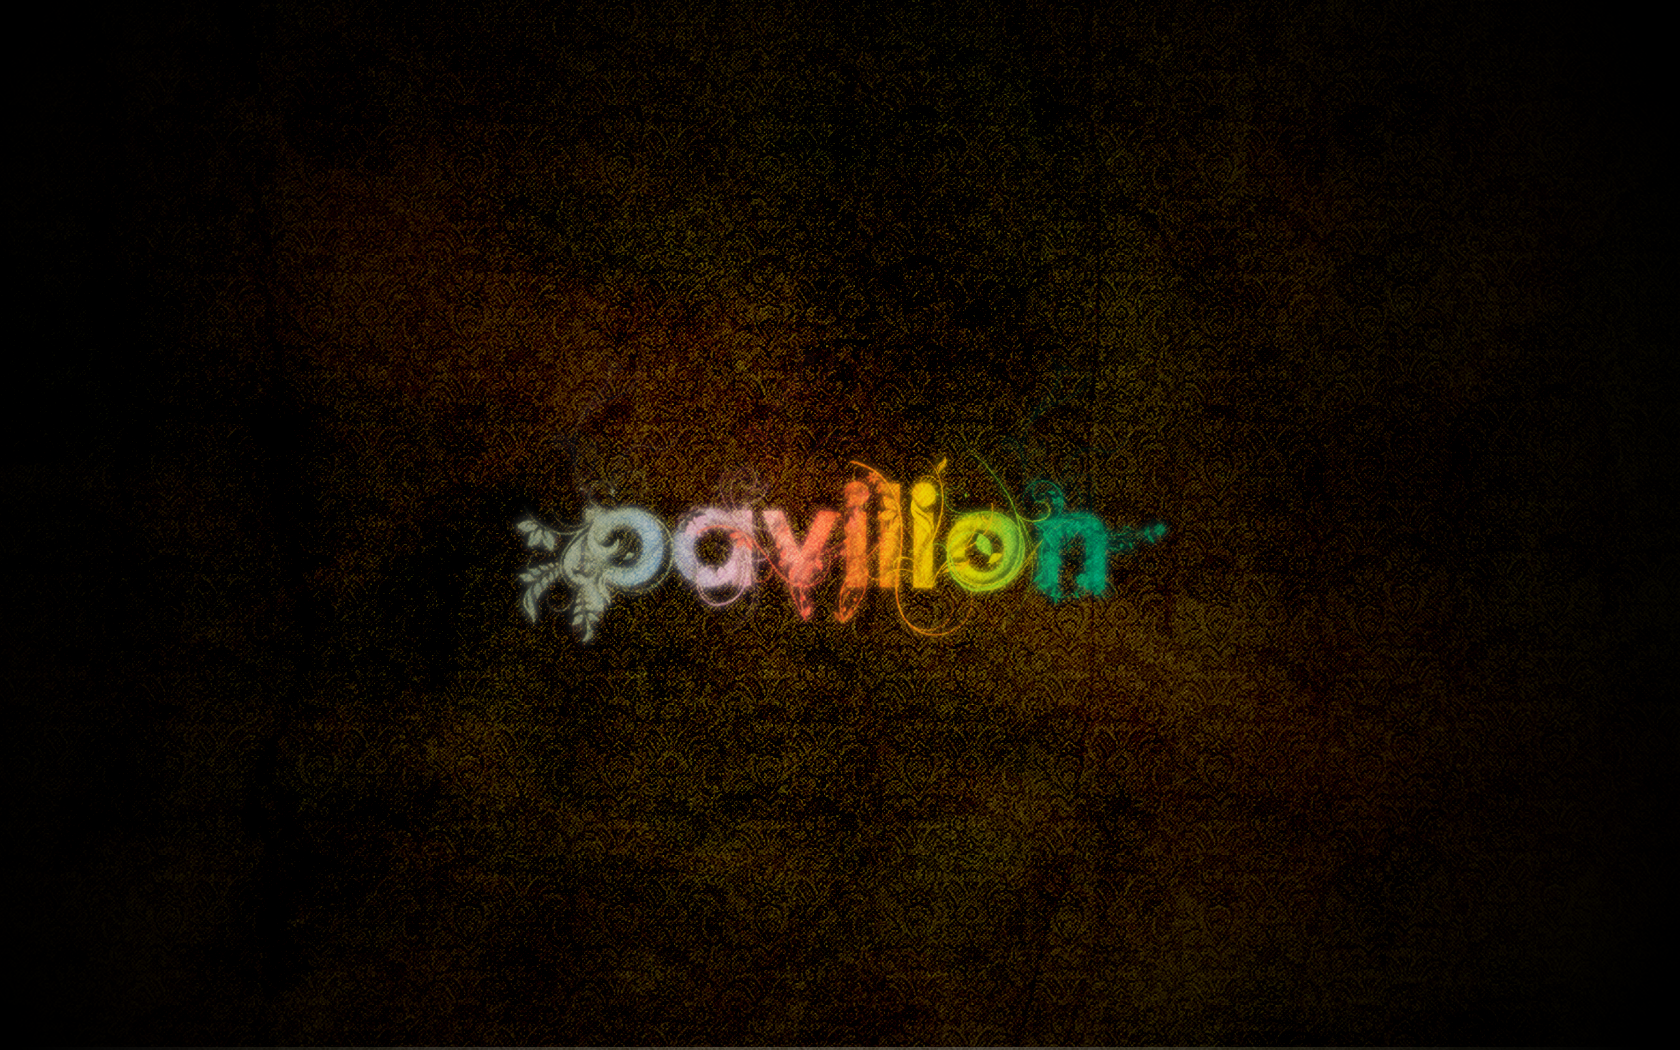 Hp Pavilion Desktop Background Pc Android iPhone And iPad Wallpaper